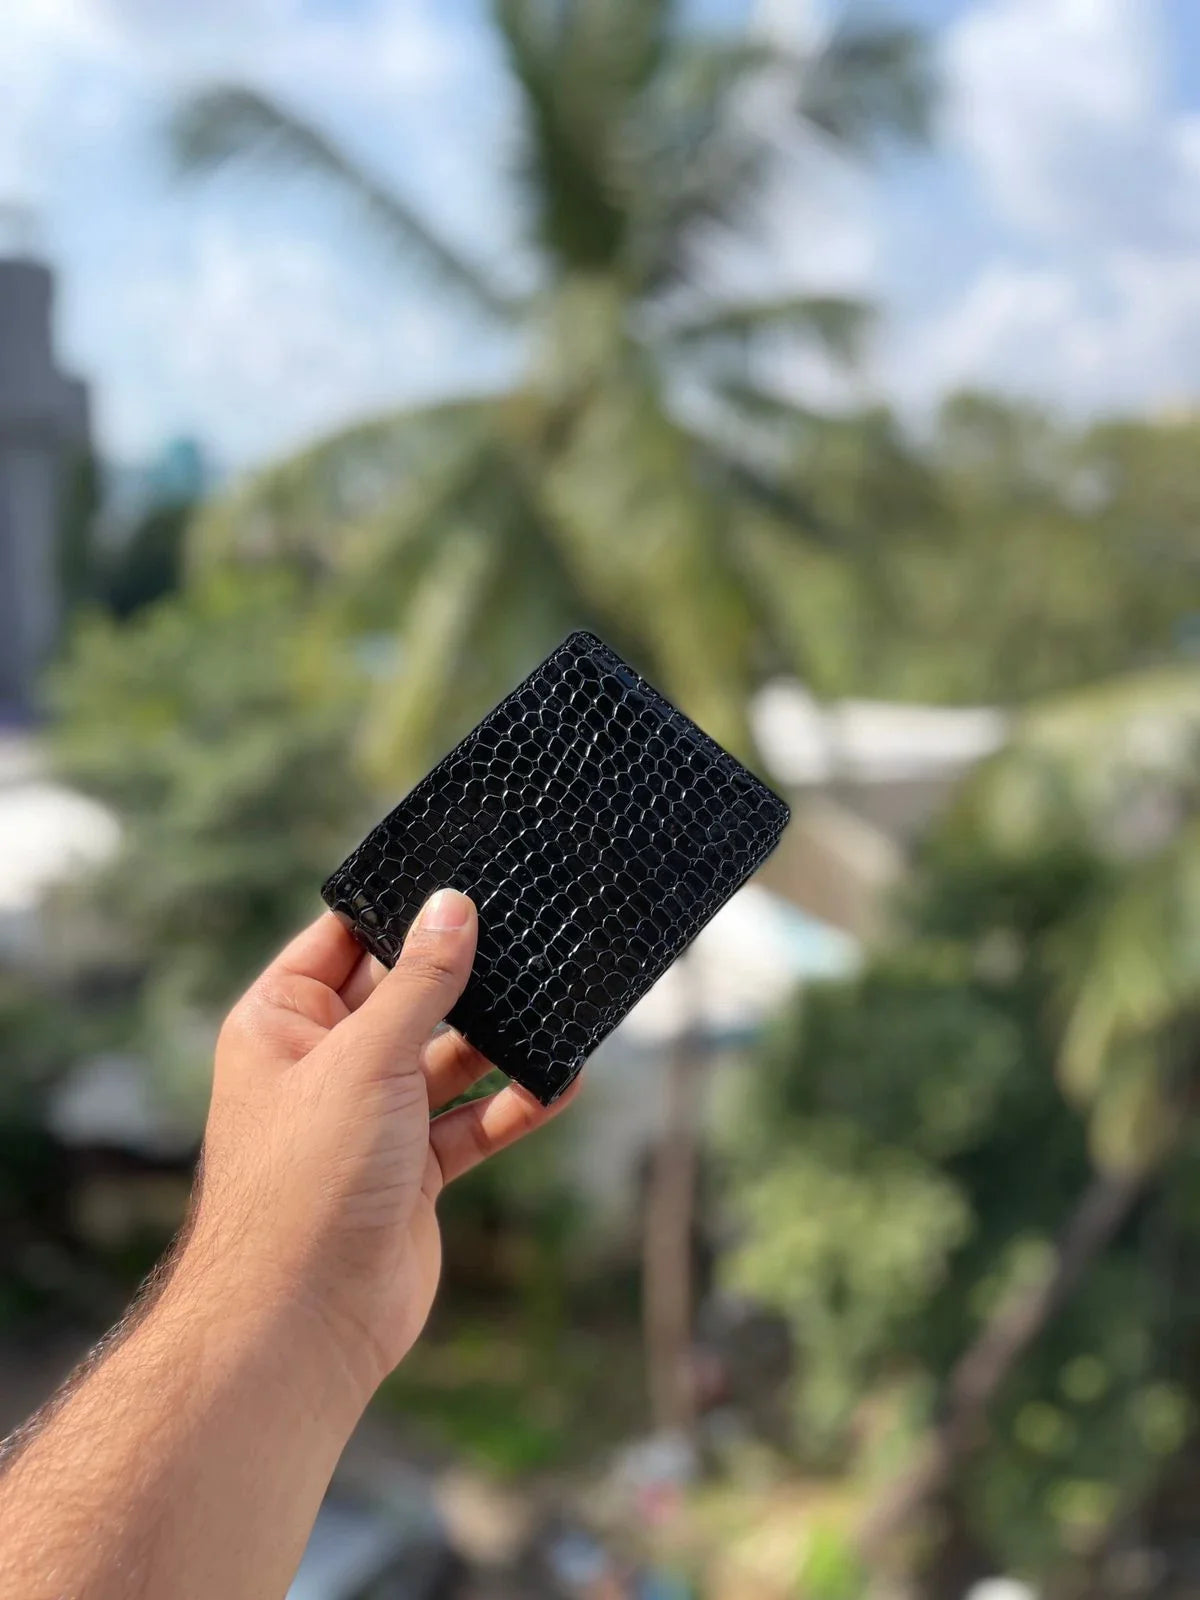 Perfectly designed to hold your cash and cards, our personalized croc leather men's wallet is a timeless accessory.